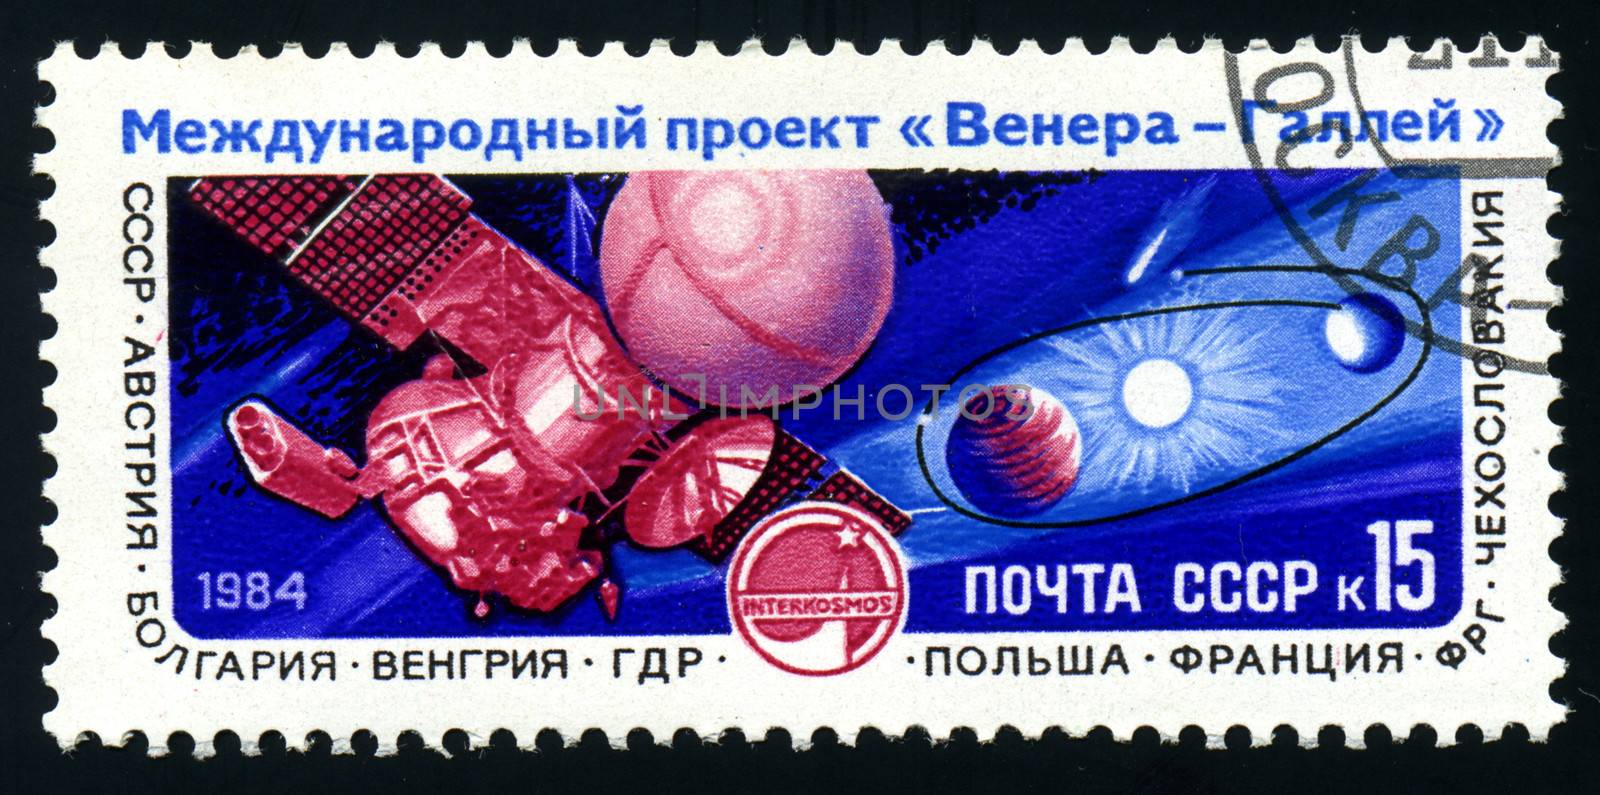 USSR - CIRCA 1985: An airmail stamp printed in USSR shows a space ship, series, circa 1985. by Zhukow